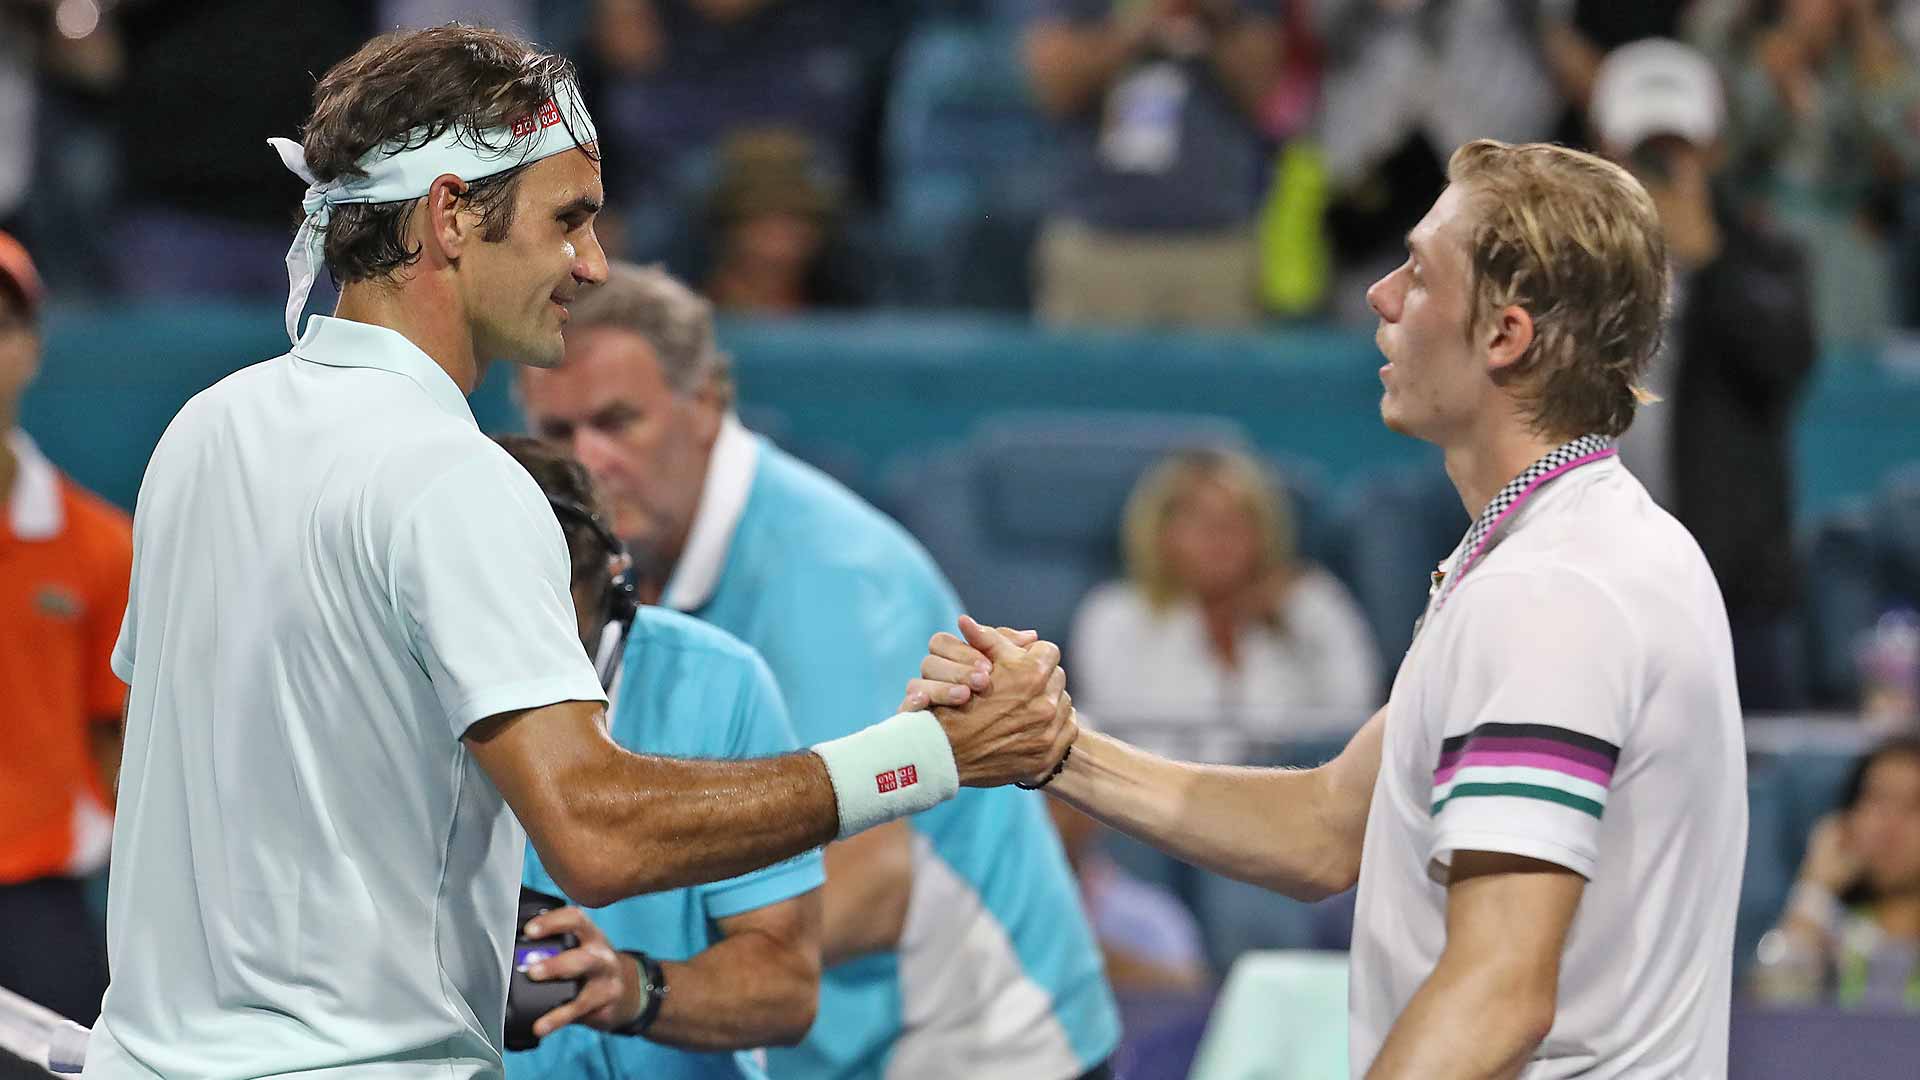 Federer shakes hands with Shapovalov after their Miami semi-final